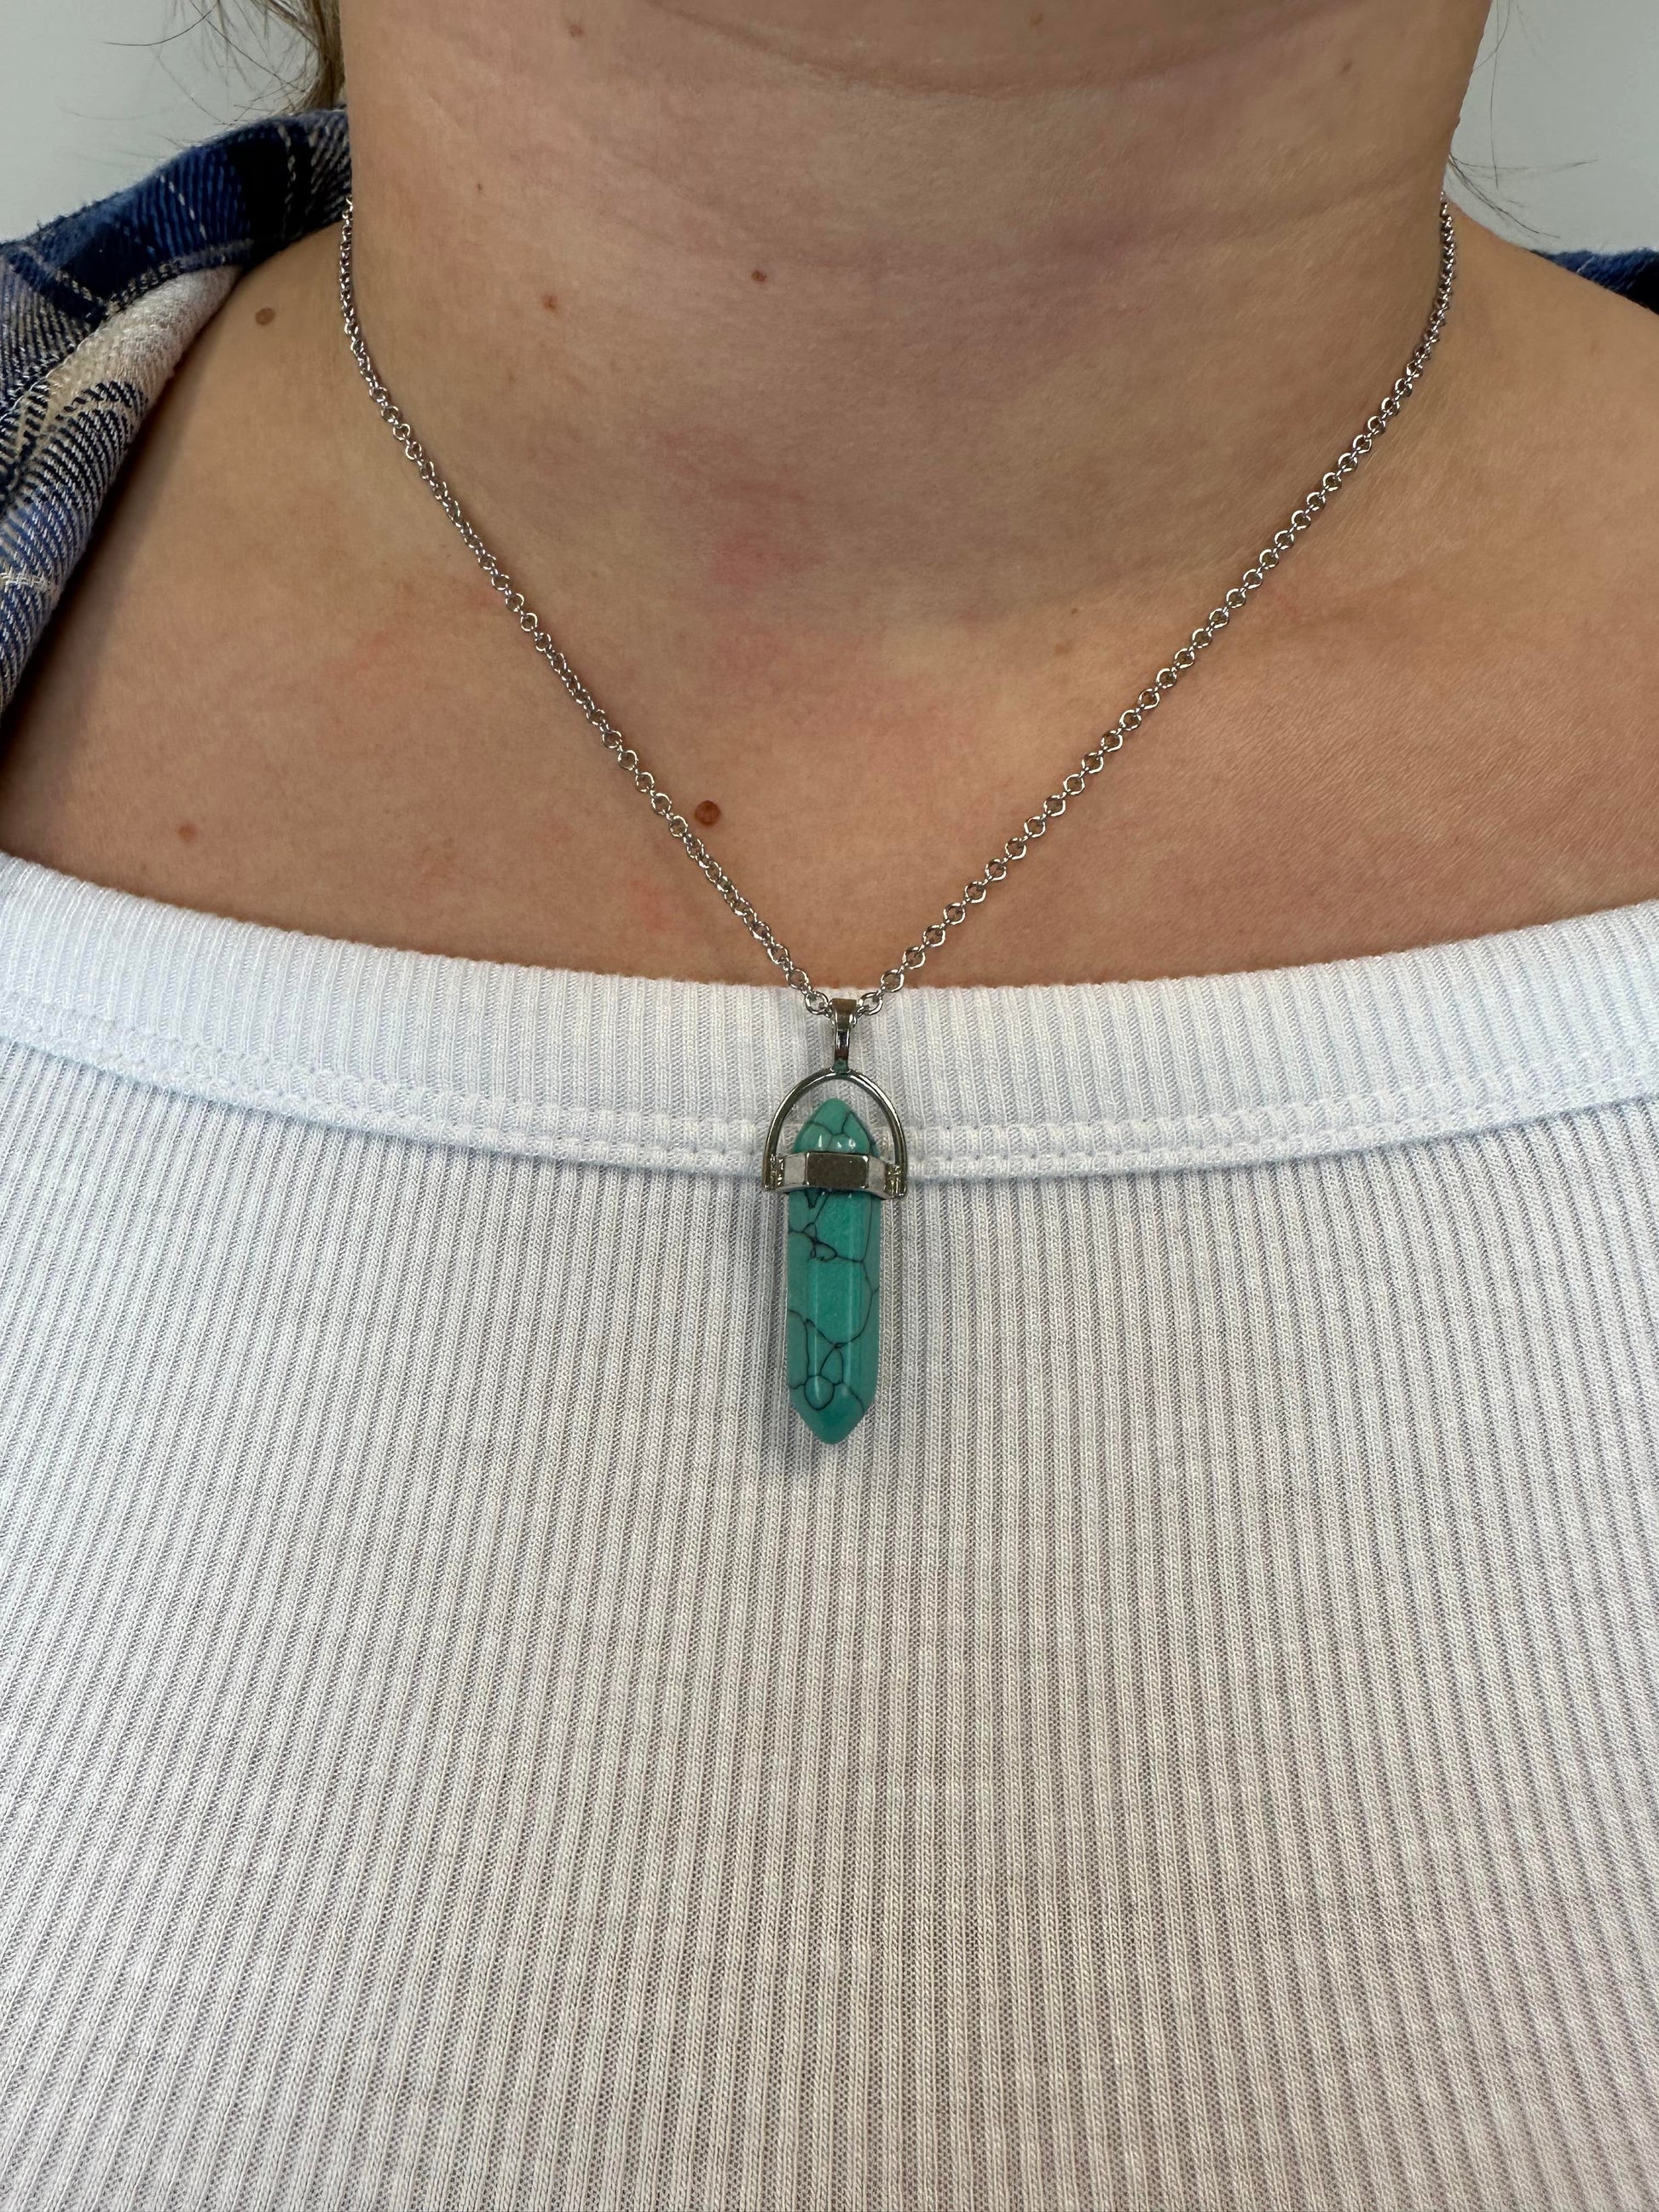 Turquoise Necklace - Three Bears Boutique